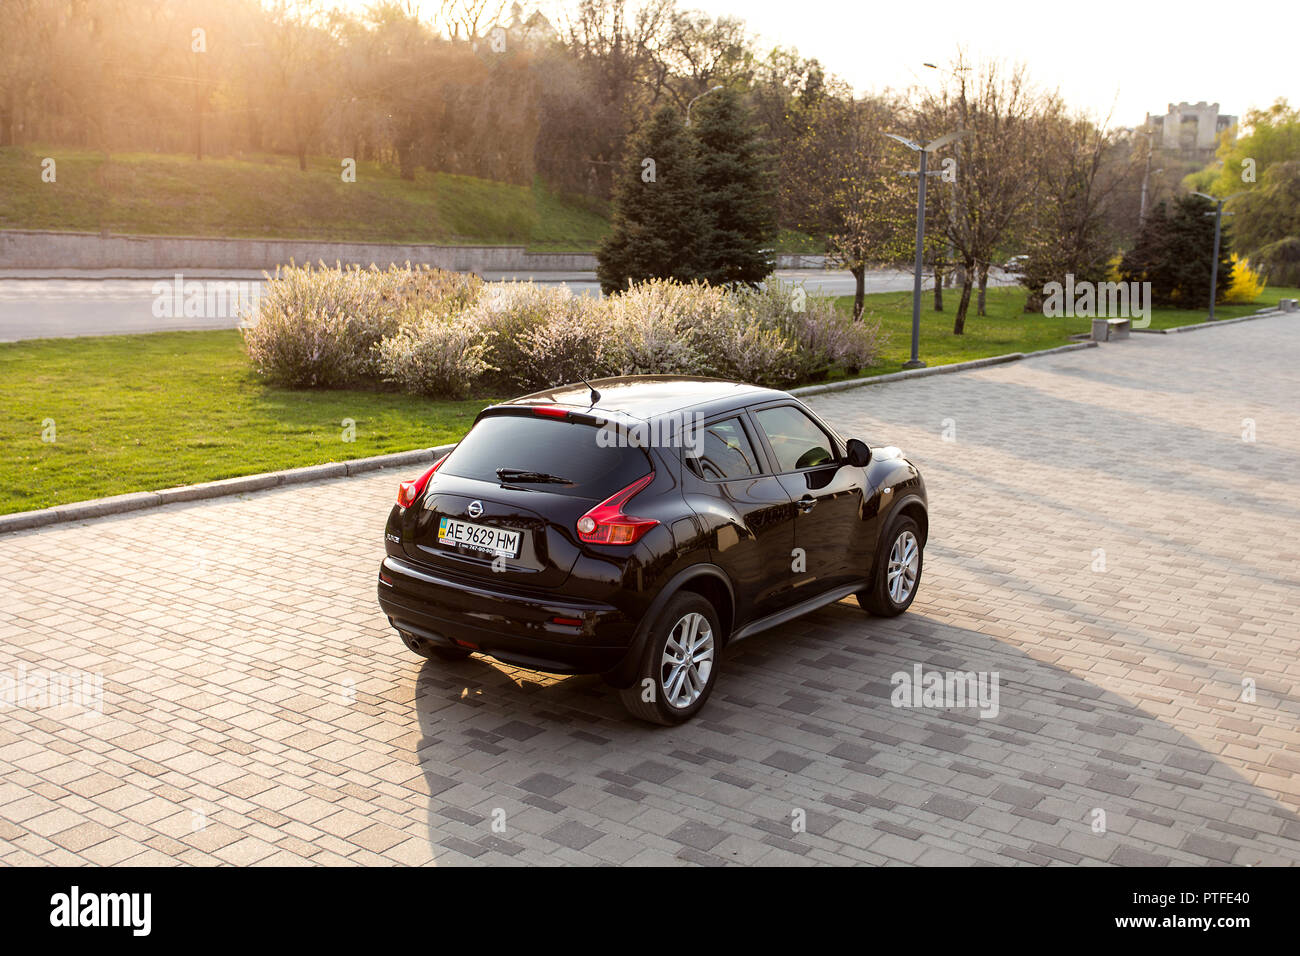 DNIPRO, UKRAINE - APRIL 12, 2016: NISSAN JUKE IN THE SPRING CITY NEAR THE PARK AT SUNSET Stock Photo